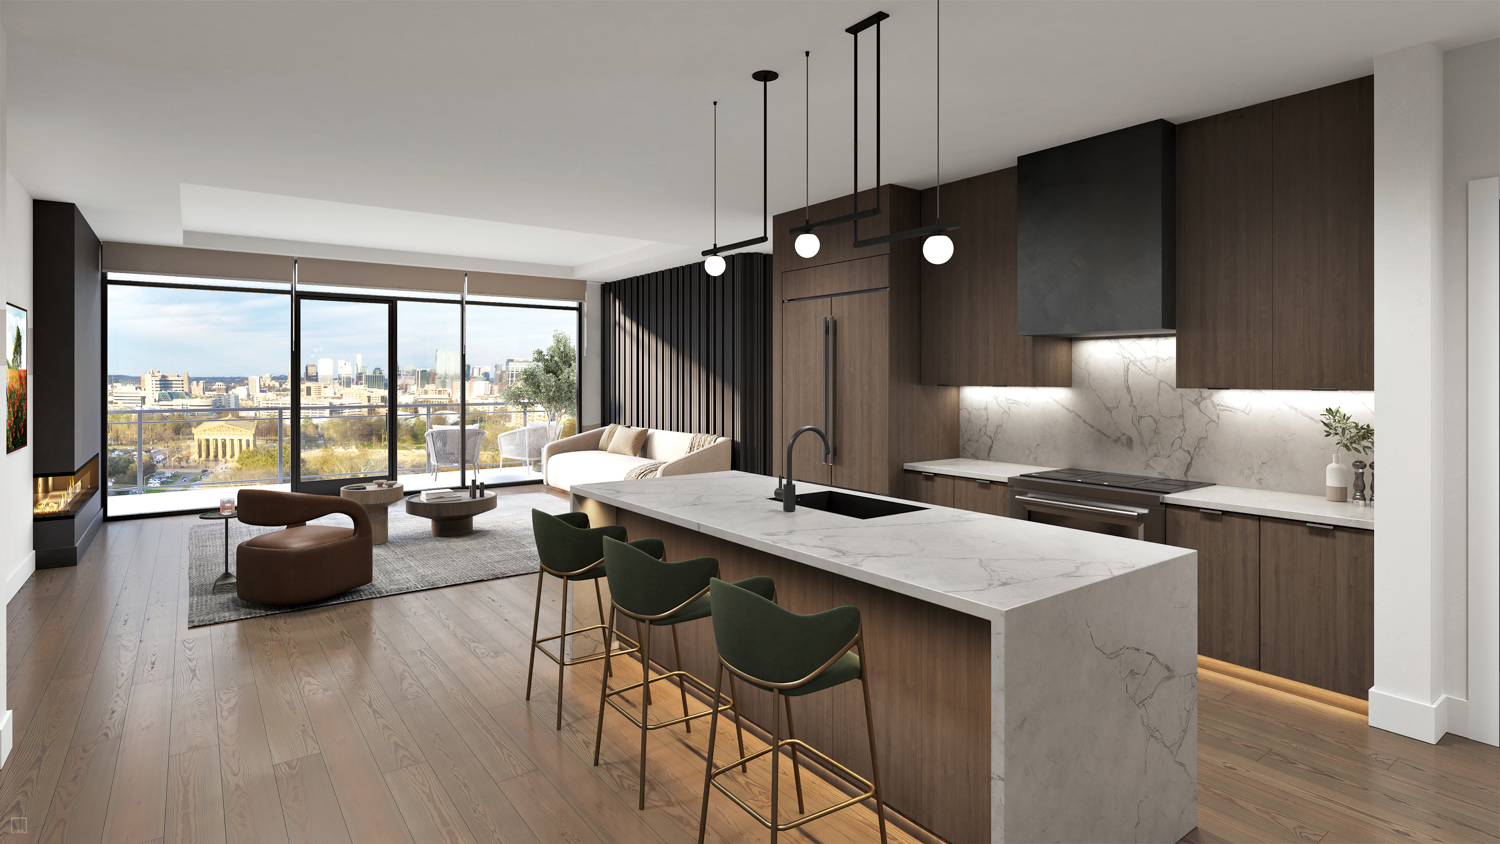 Rendering of open-concept kitchen and living area with floor-to-ceiling windows that open to a private balcony overlooking Nashville